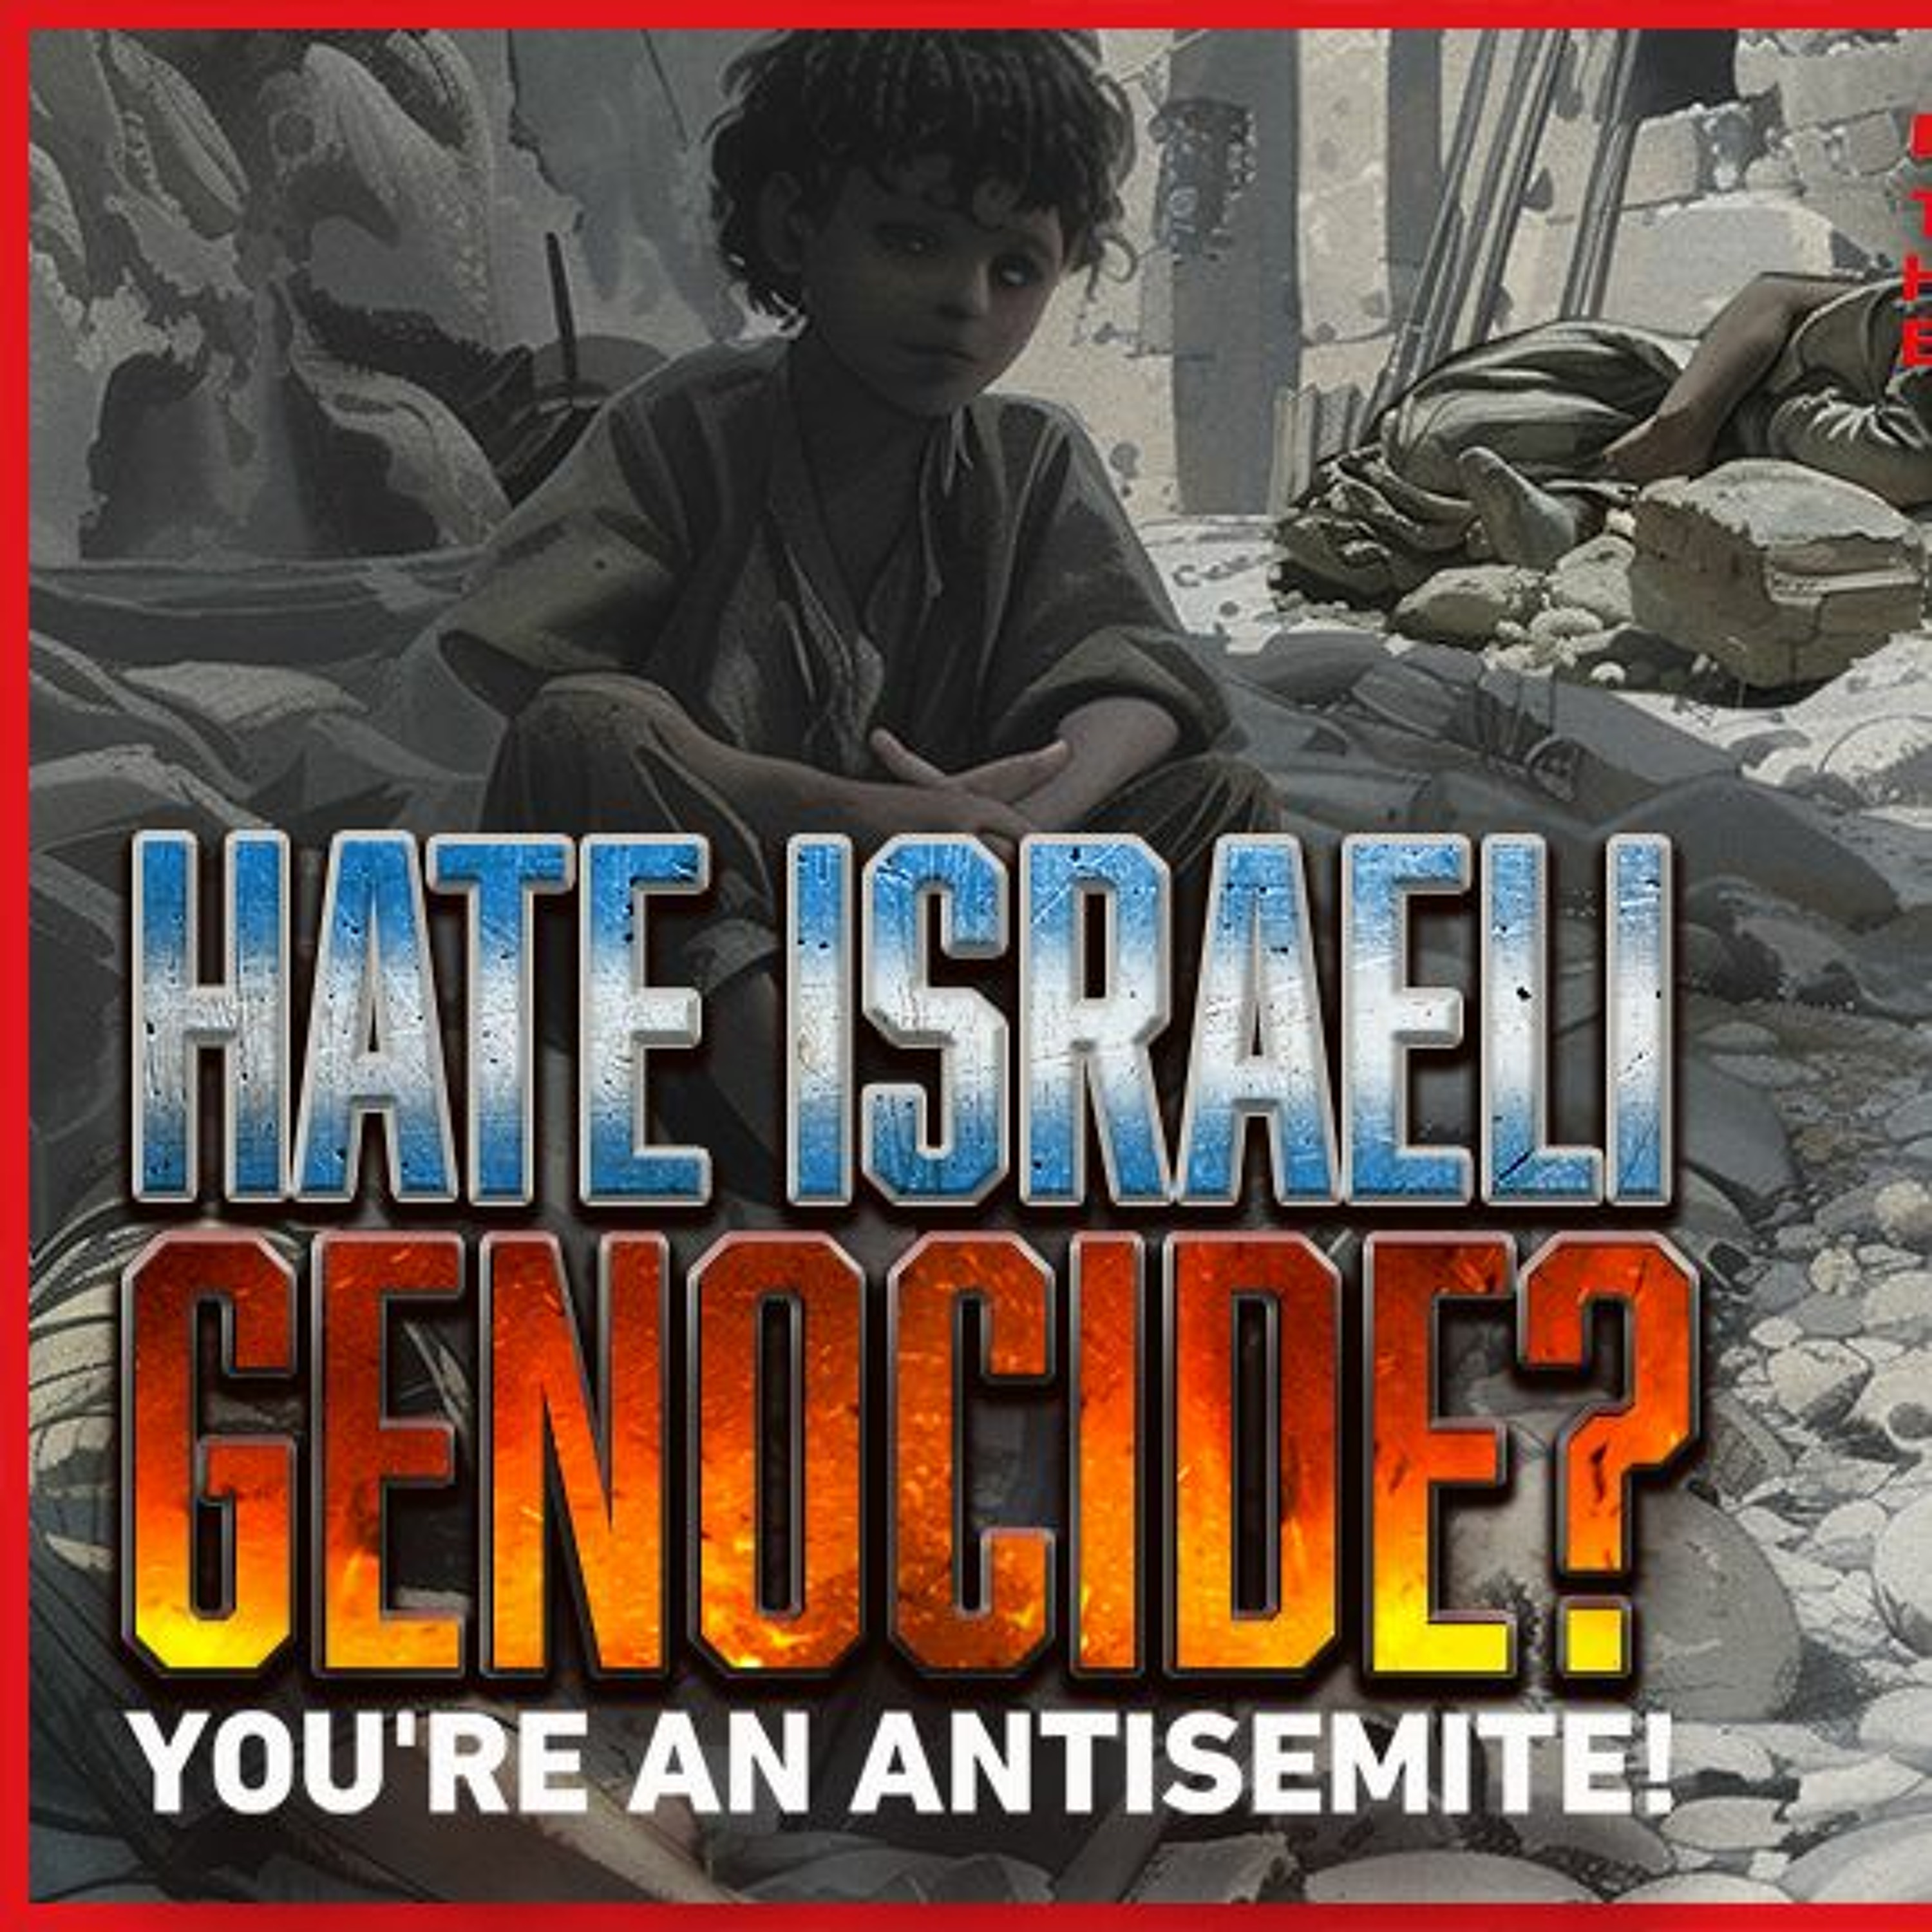 HATE ISRAELI GENOCIDE? YOURE AN ANTISEMITE!